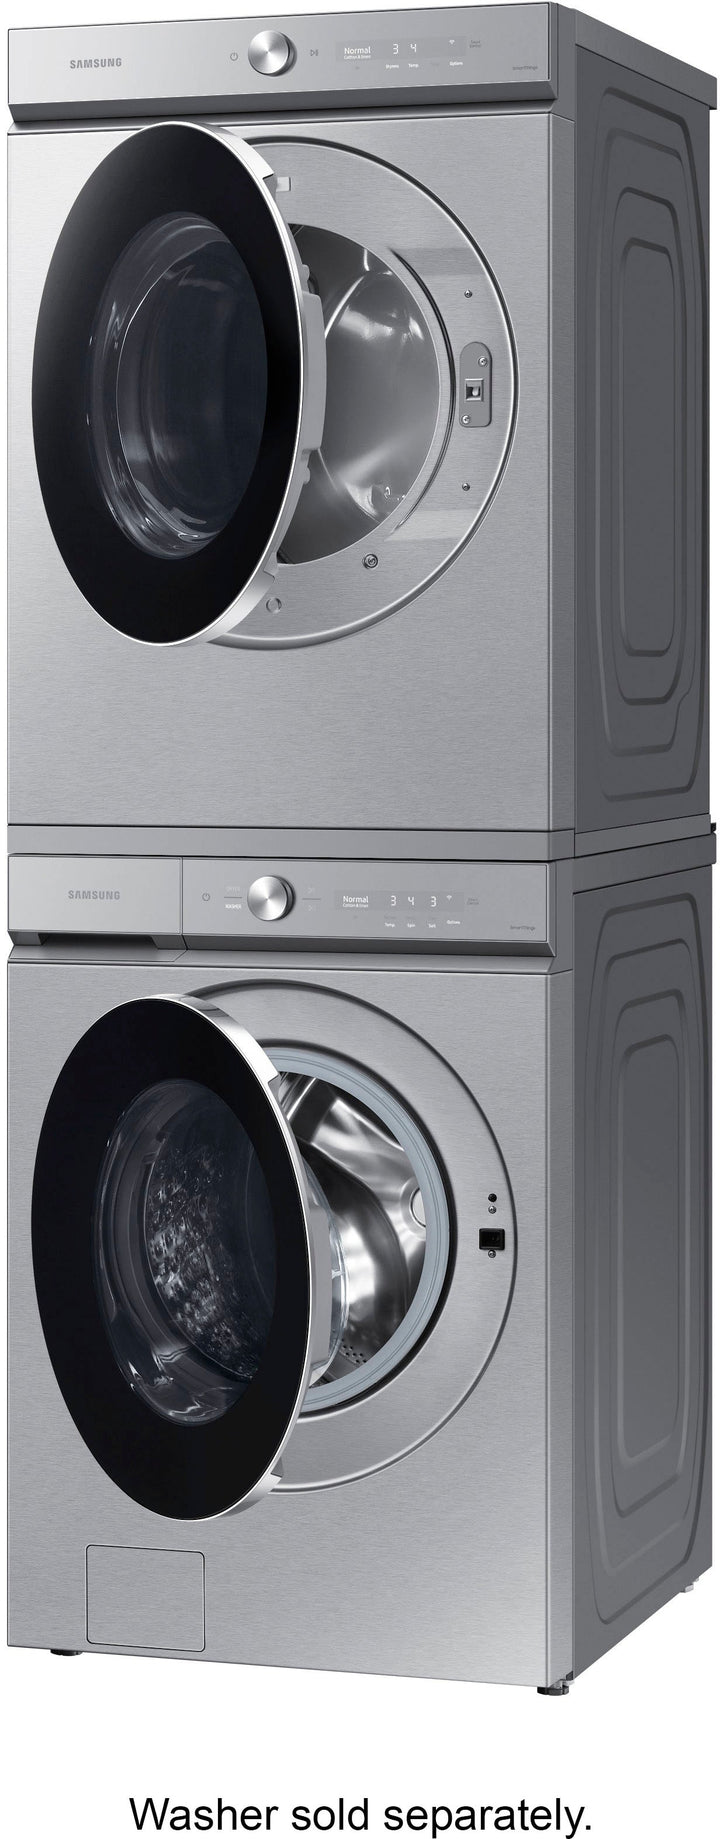 Samsung - Bespoke 7.6 cu. ft. Ultra Capacity Gas Dryer with AI Optimal Dry and Super Speed Dry - Silver steel_8